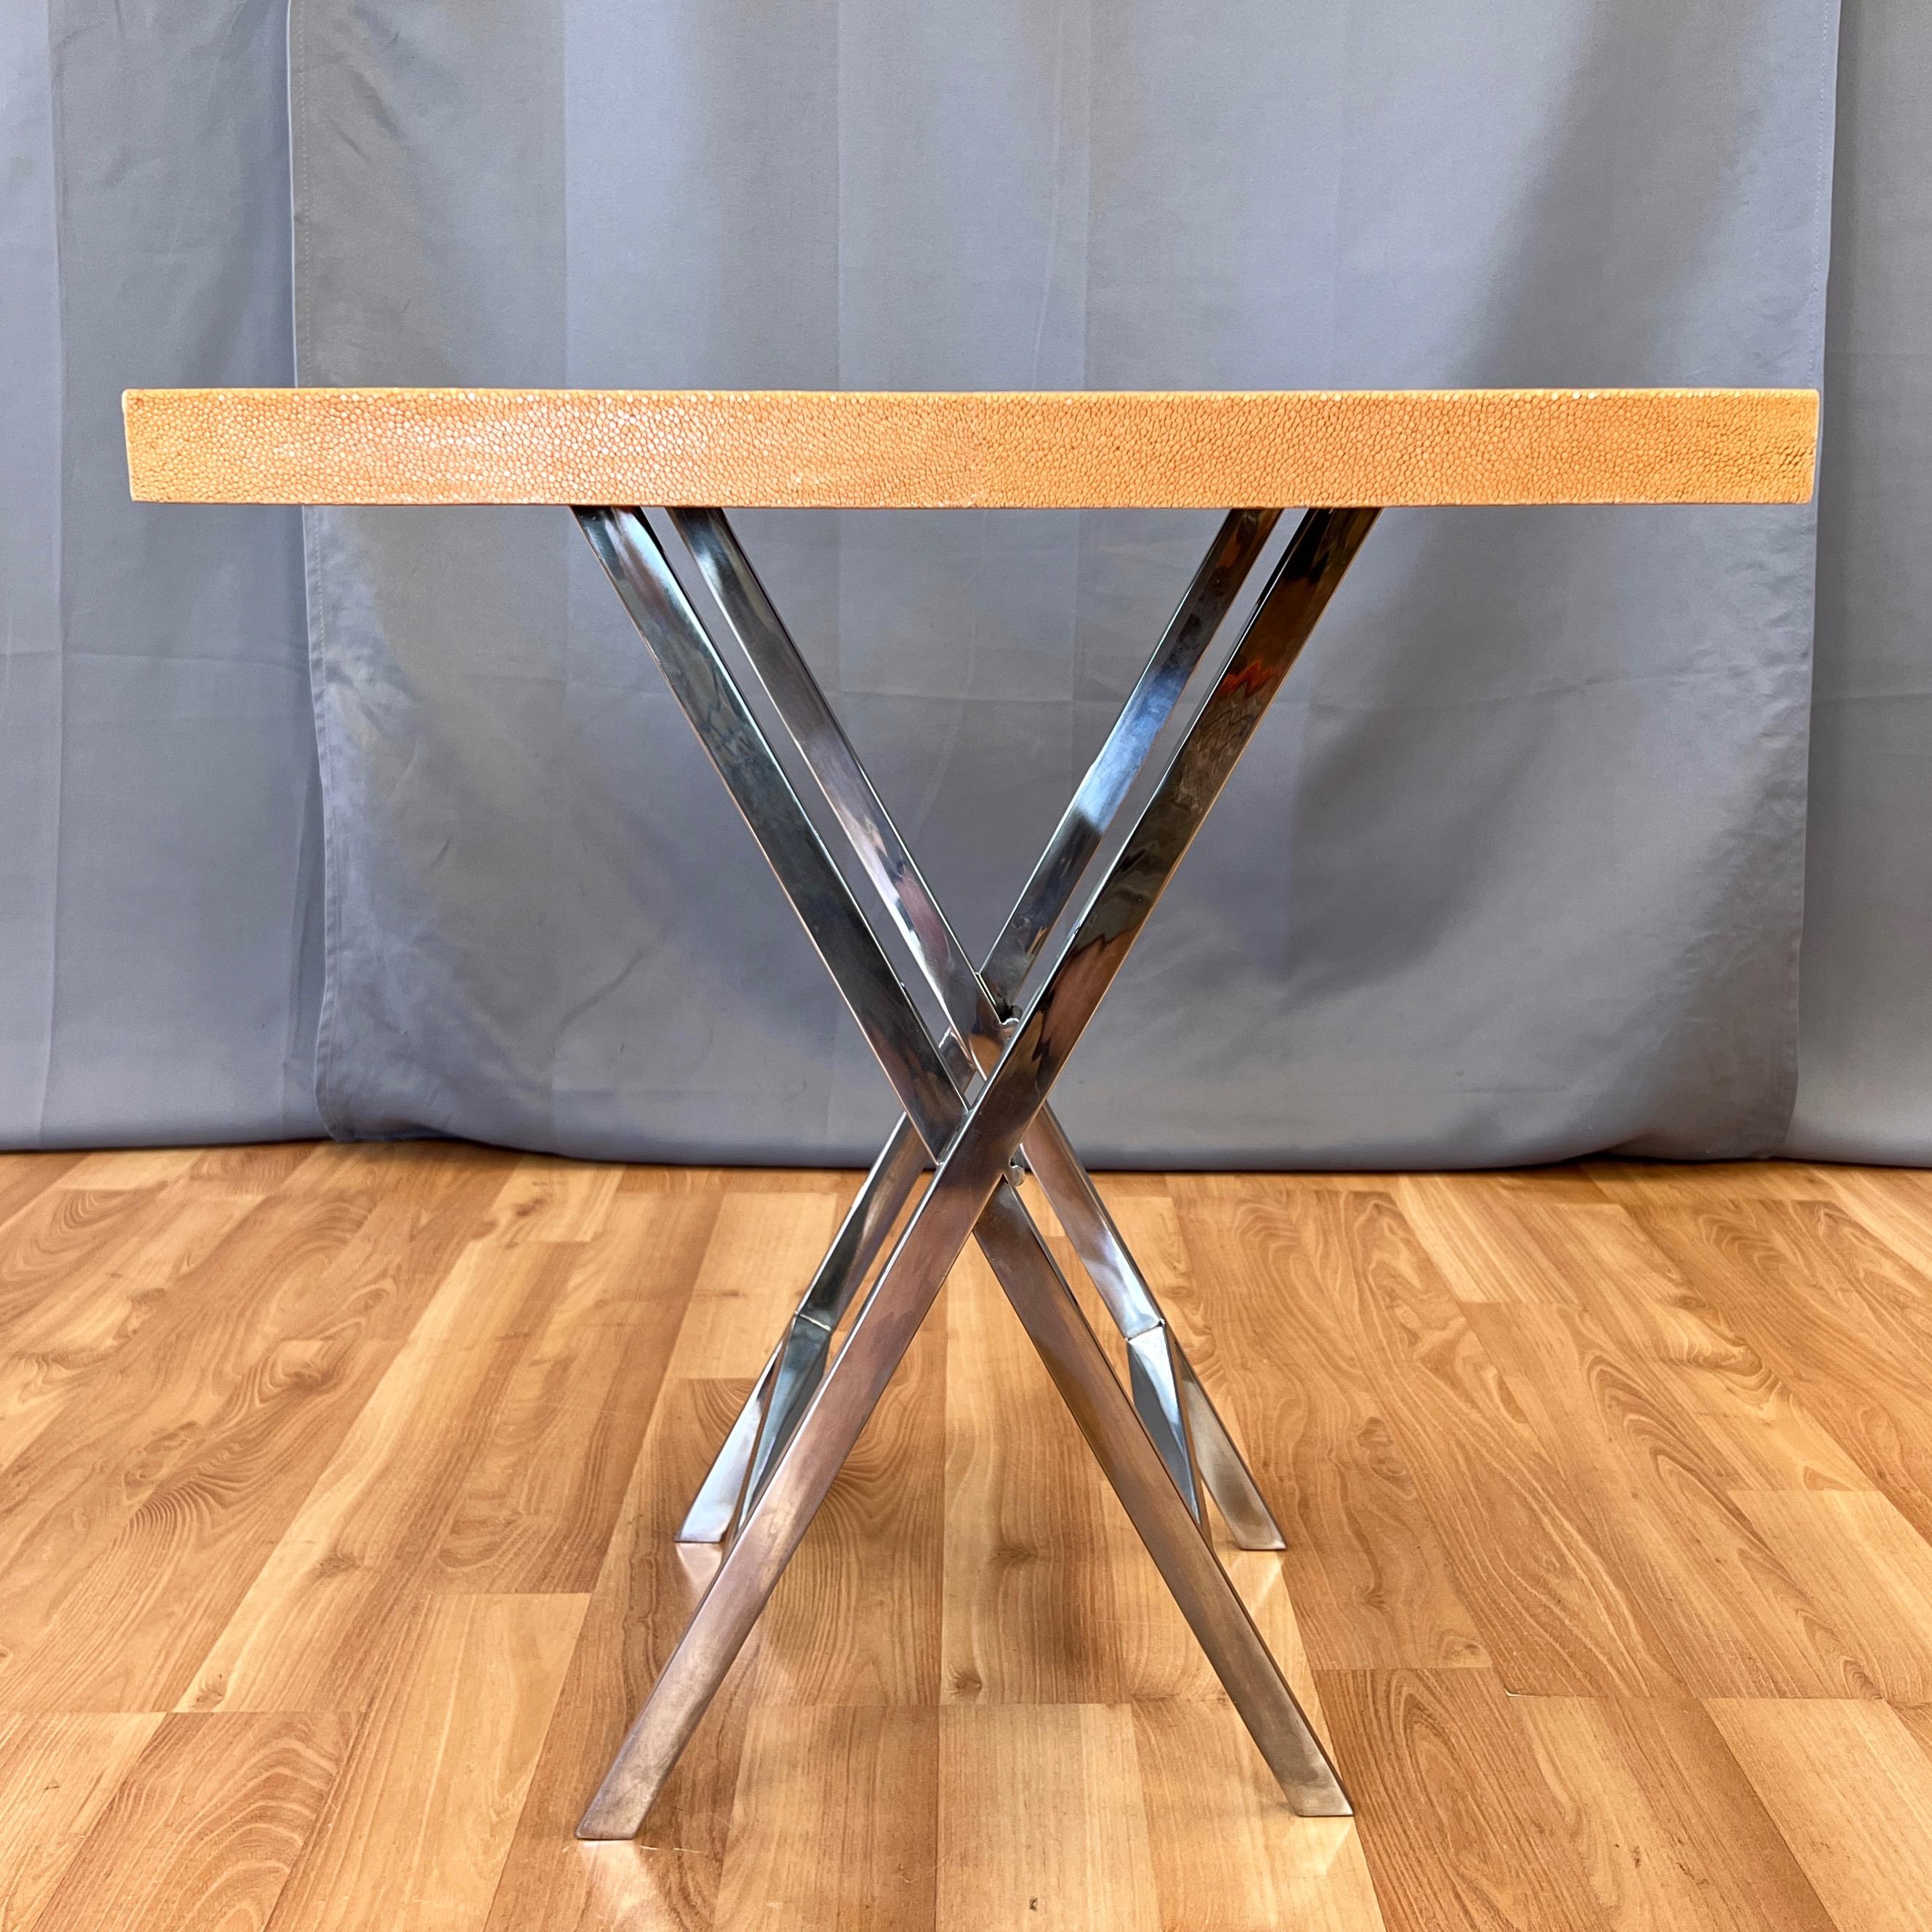 Late 20th Century Orange Shagreen Campaign Side Table with Polished Nickel X-Base, circa 1980 For Sale